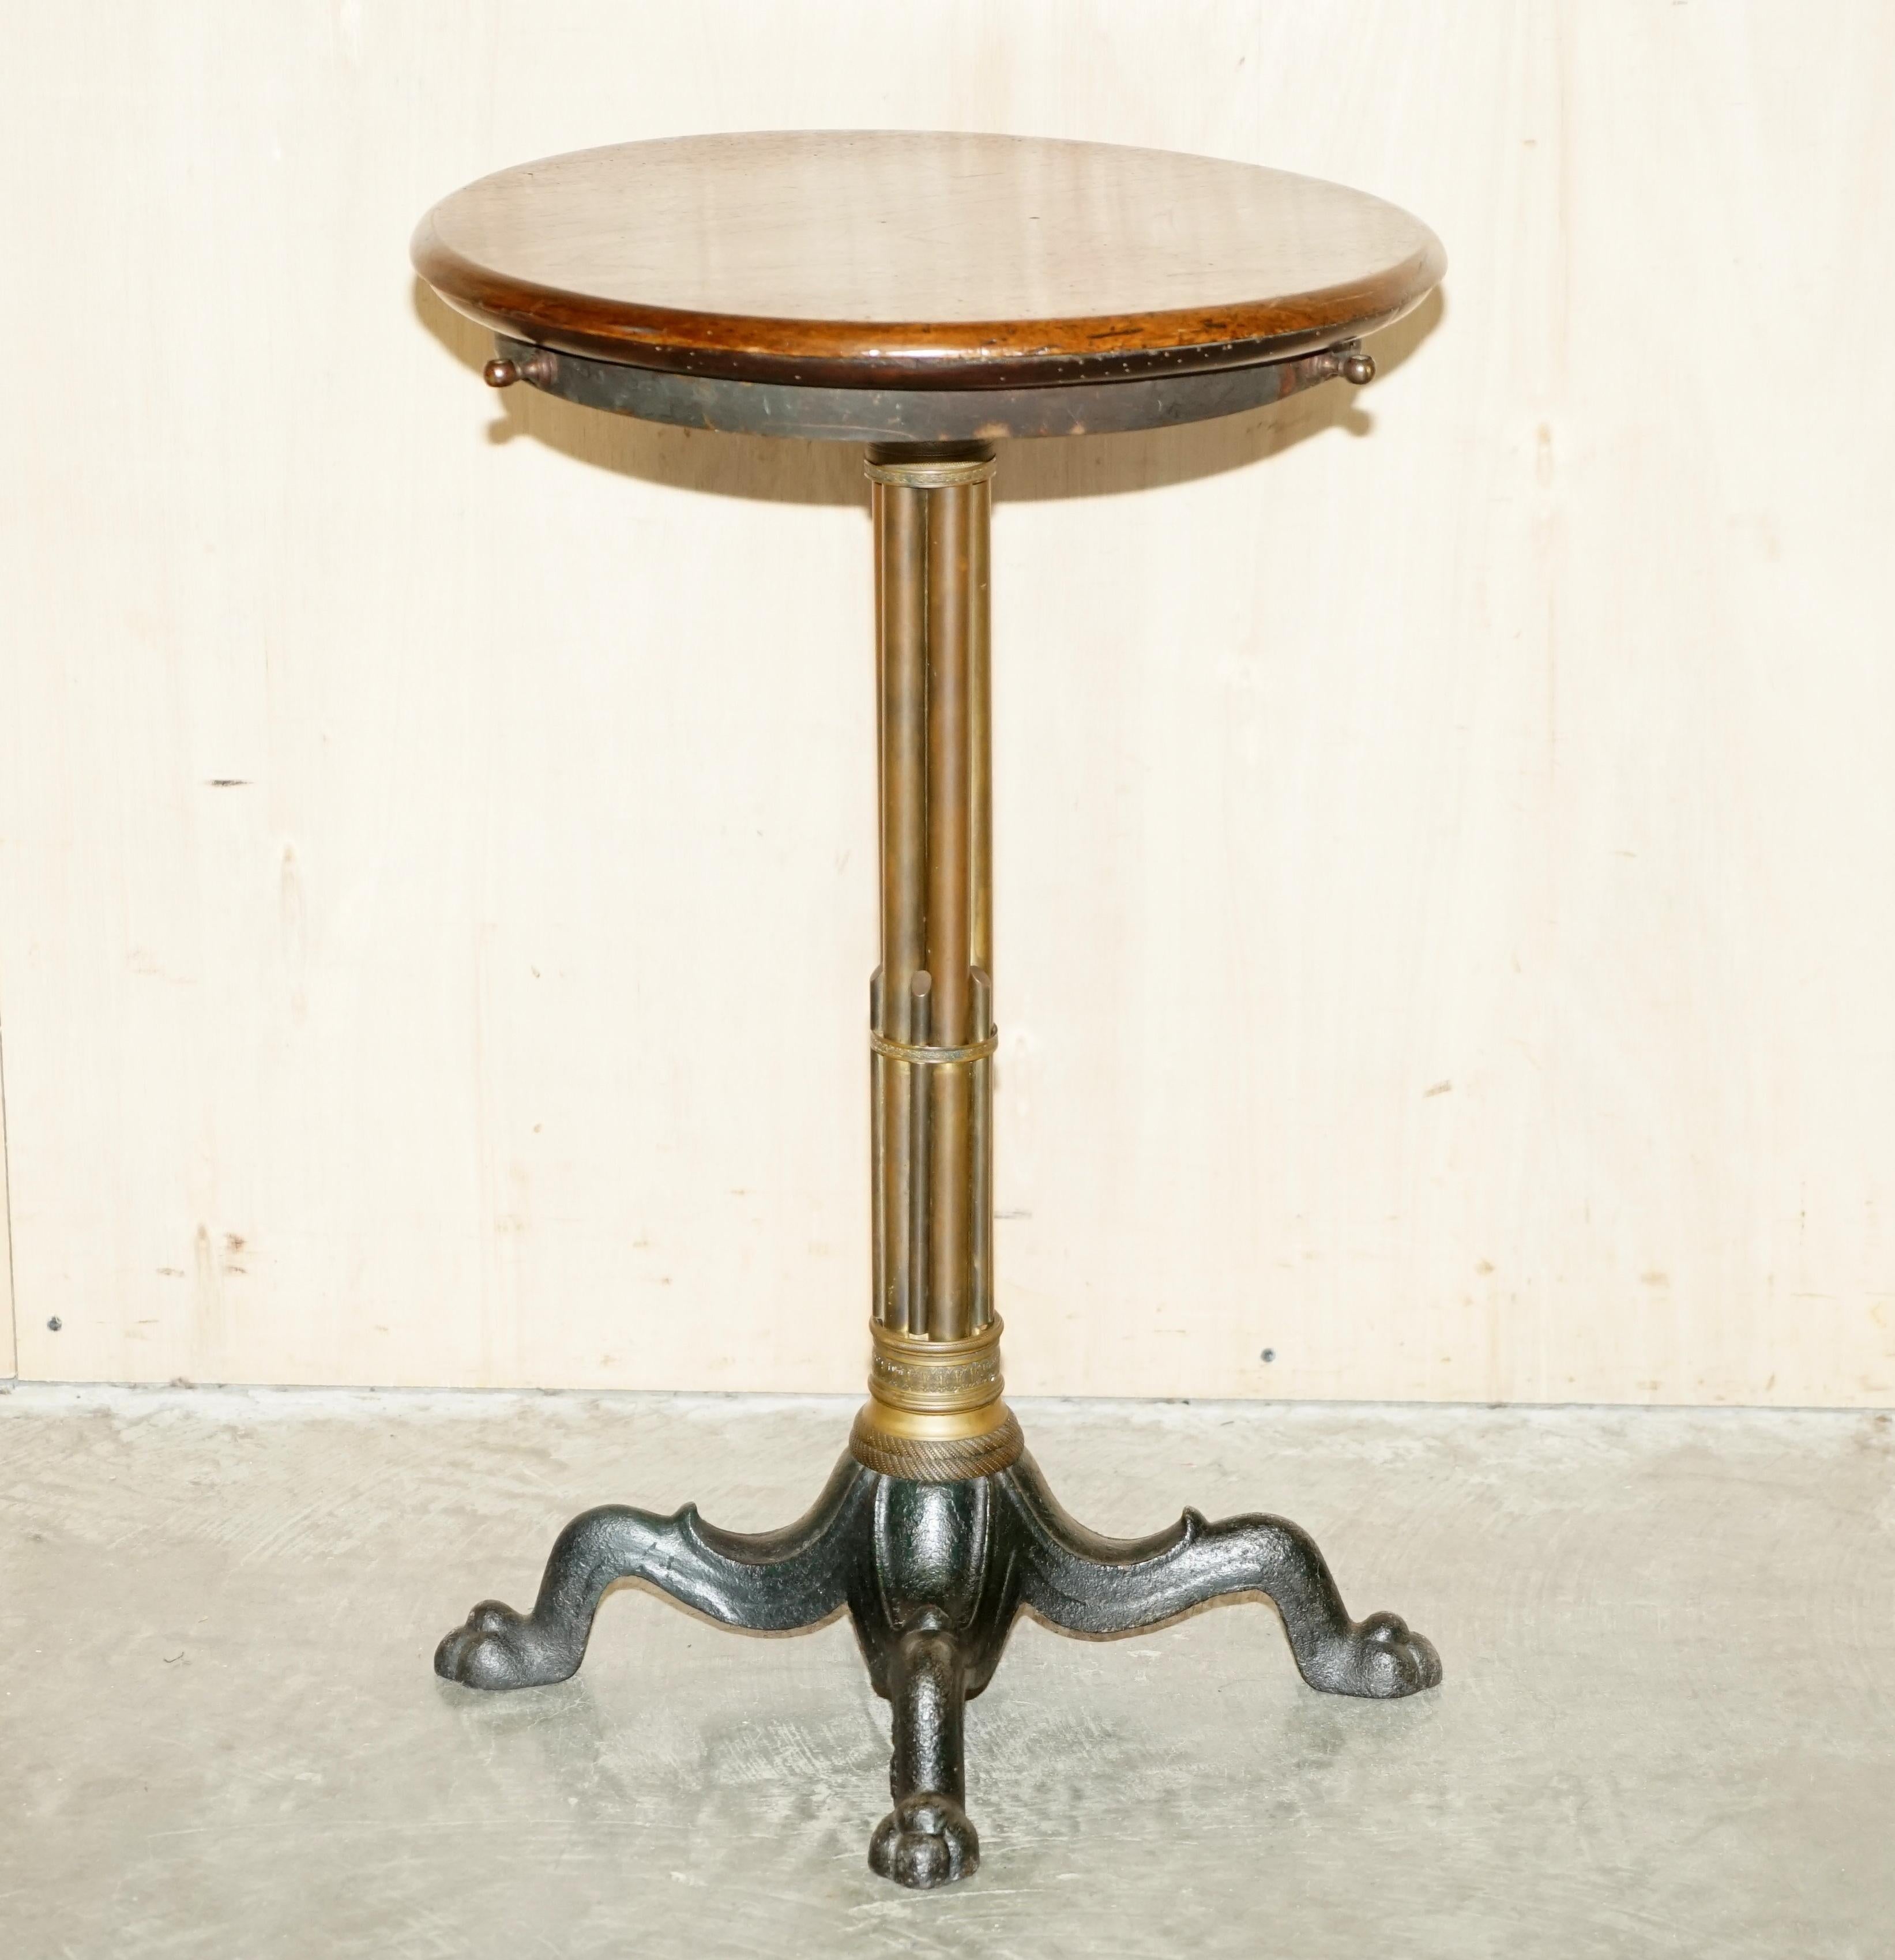 We are delighted to offer for sale this absolutely stunning Mahogany topped Bronze and Cast Iron side table with oversized lion hairy paw base

A very good looking decorative and well made piece, I have owned this personally for the last 6 years,